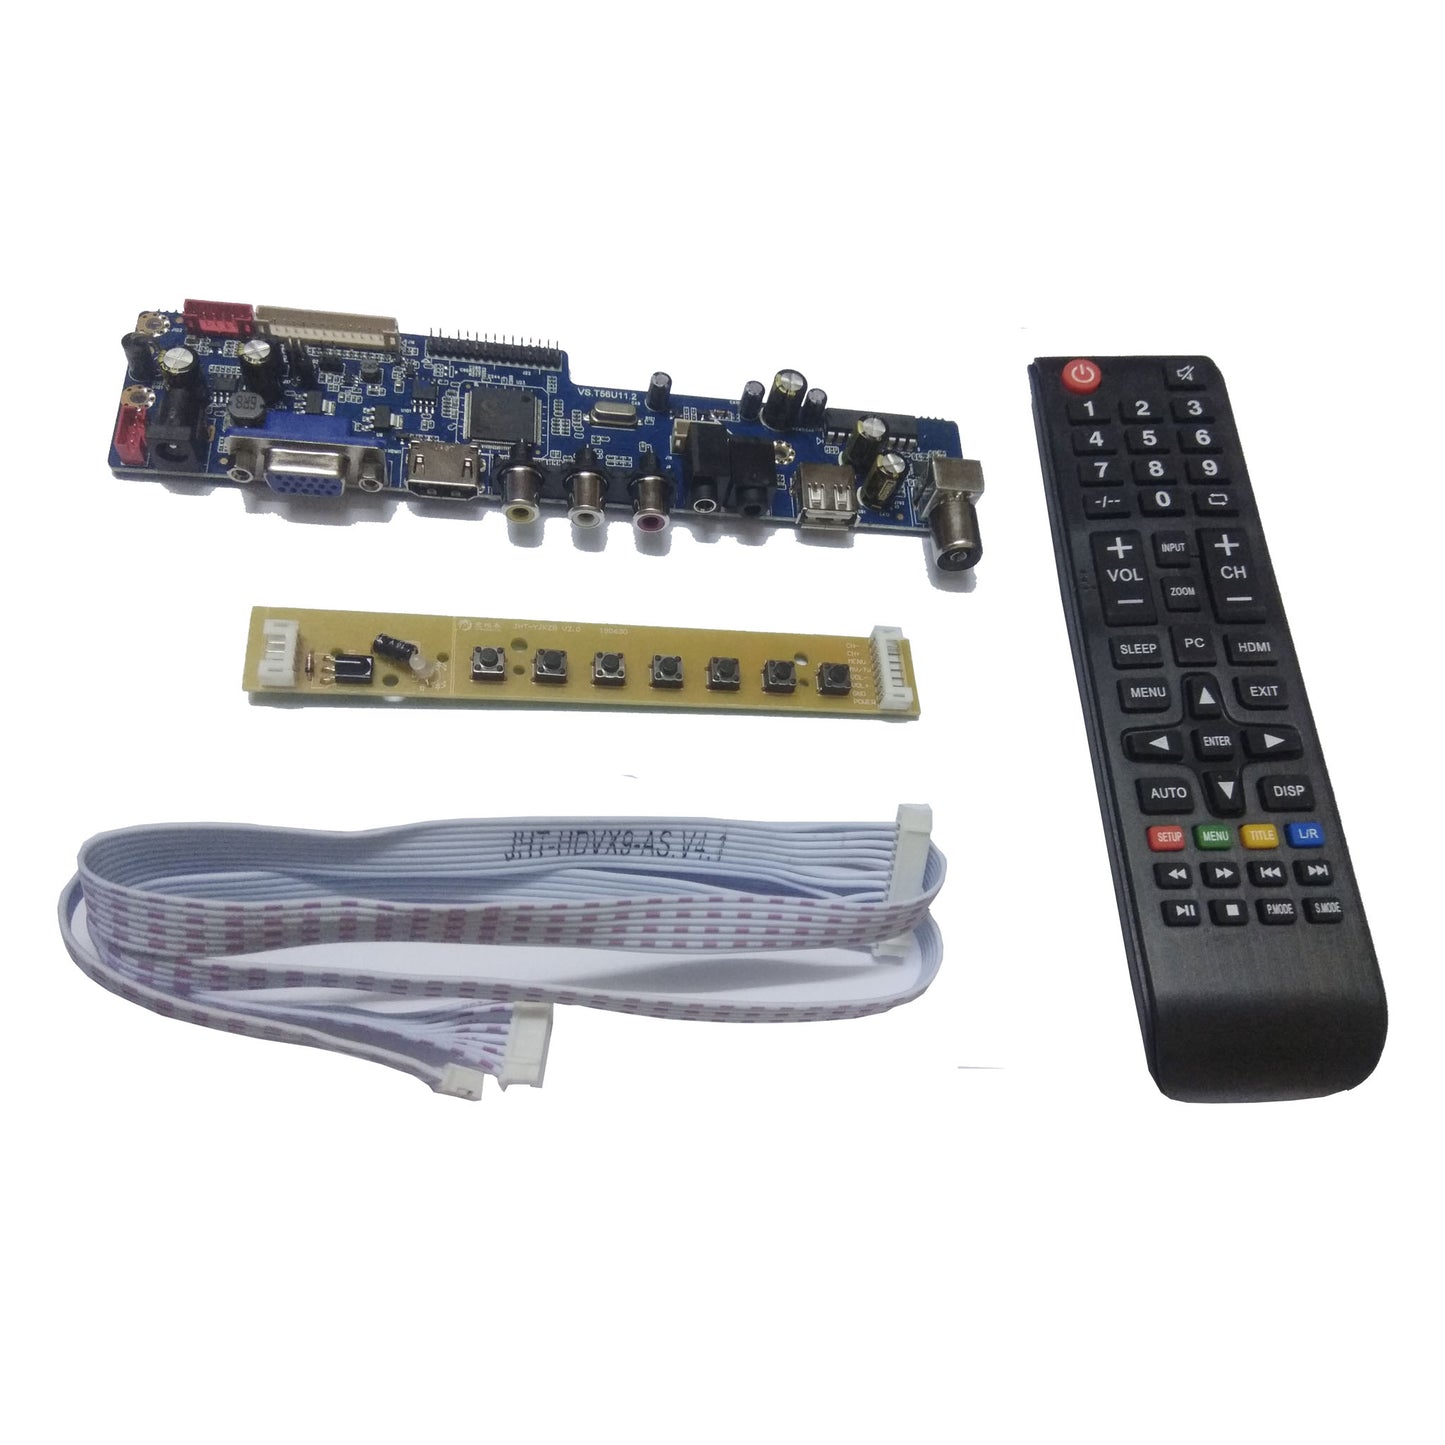 LCD/LED Tv Main Board, Support USB Multimedia Playback, U Disk Updating Support 14 inch  to 32 inch